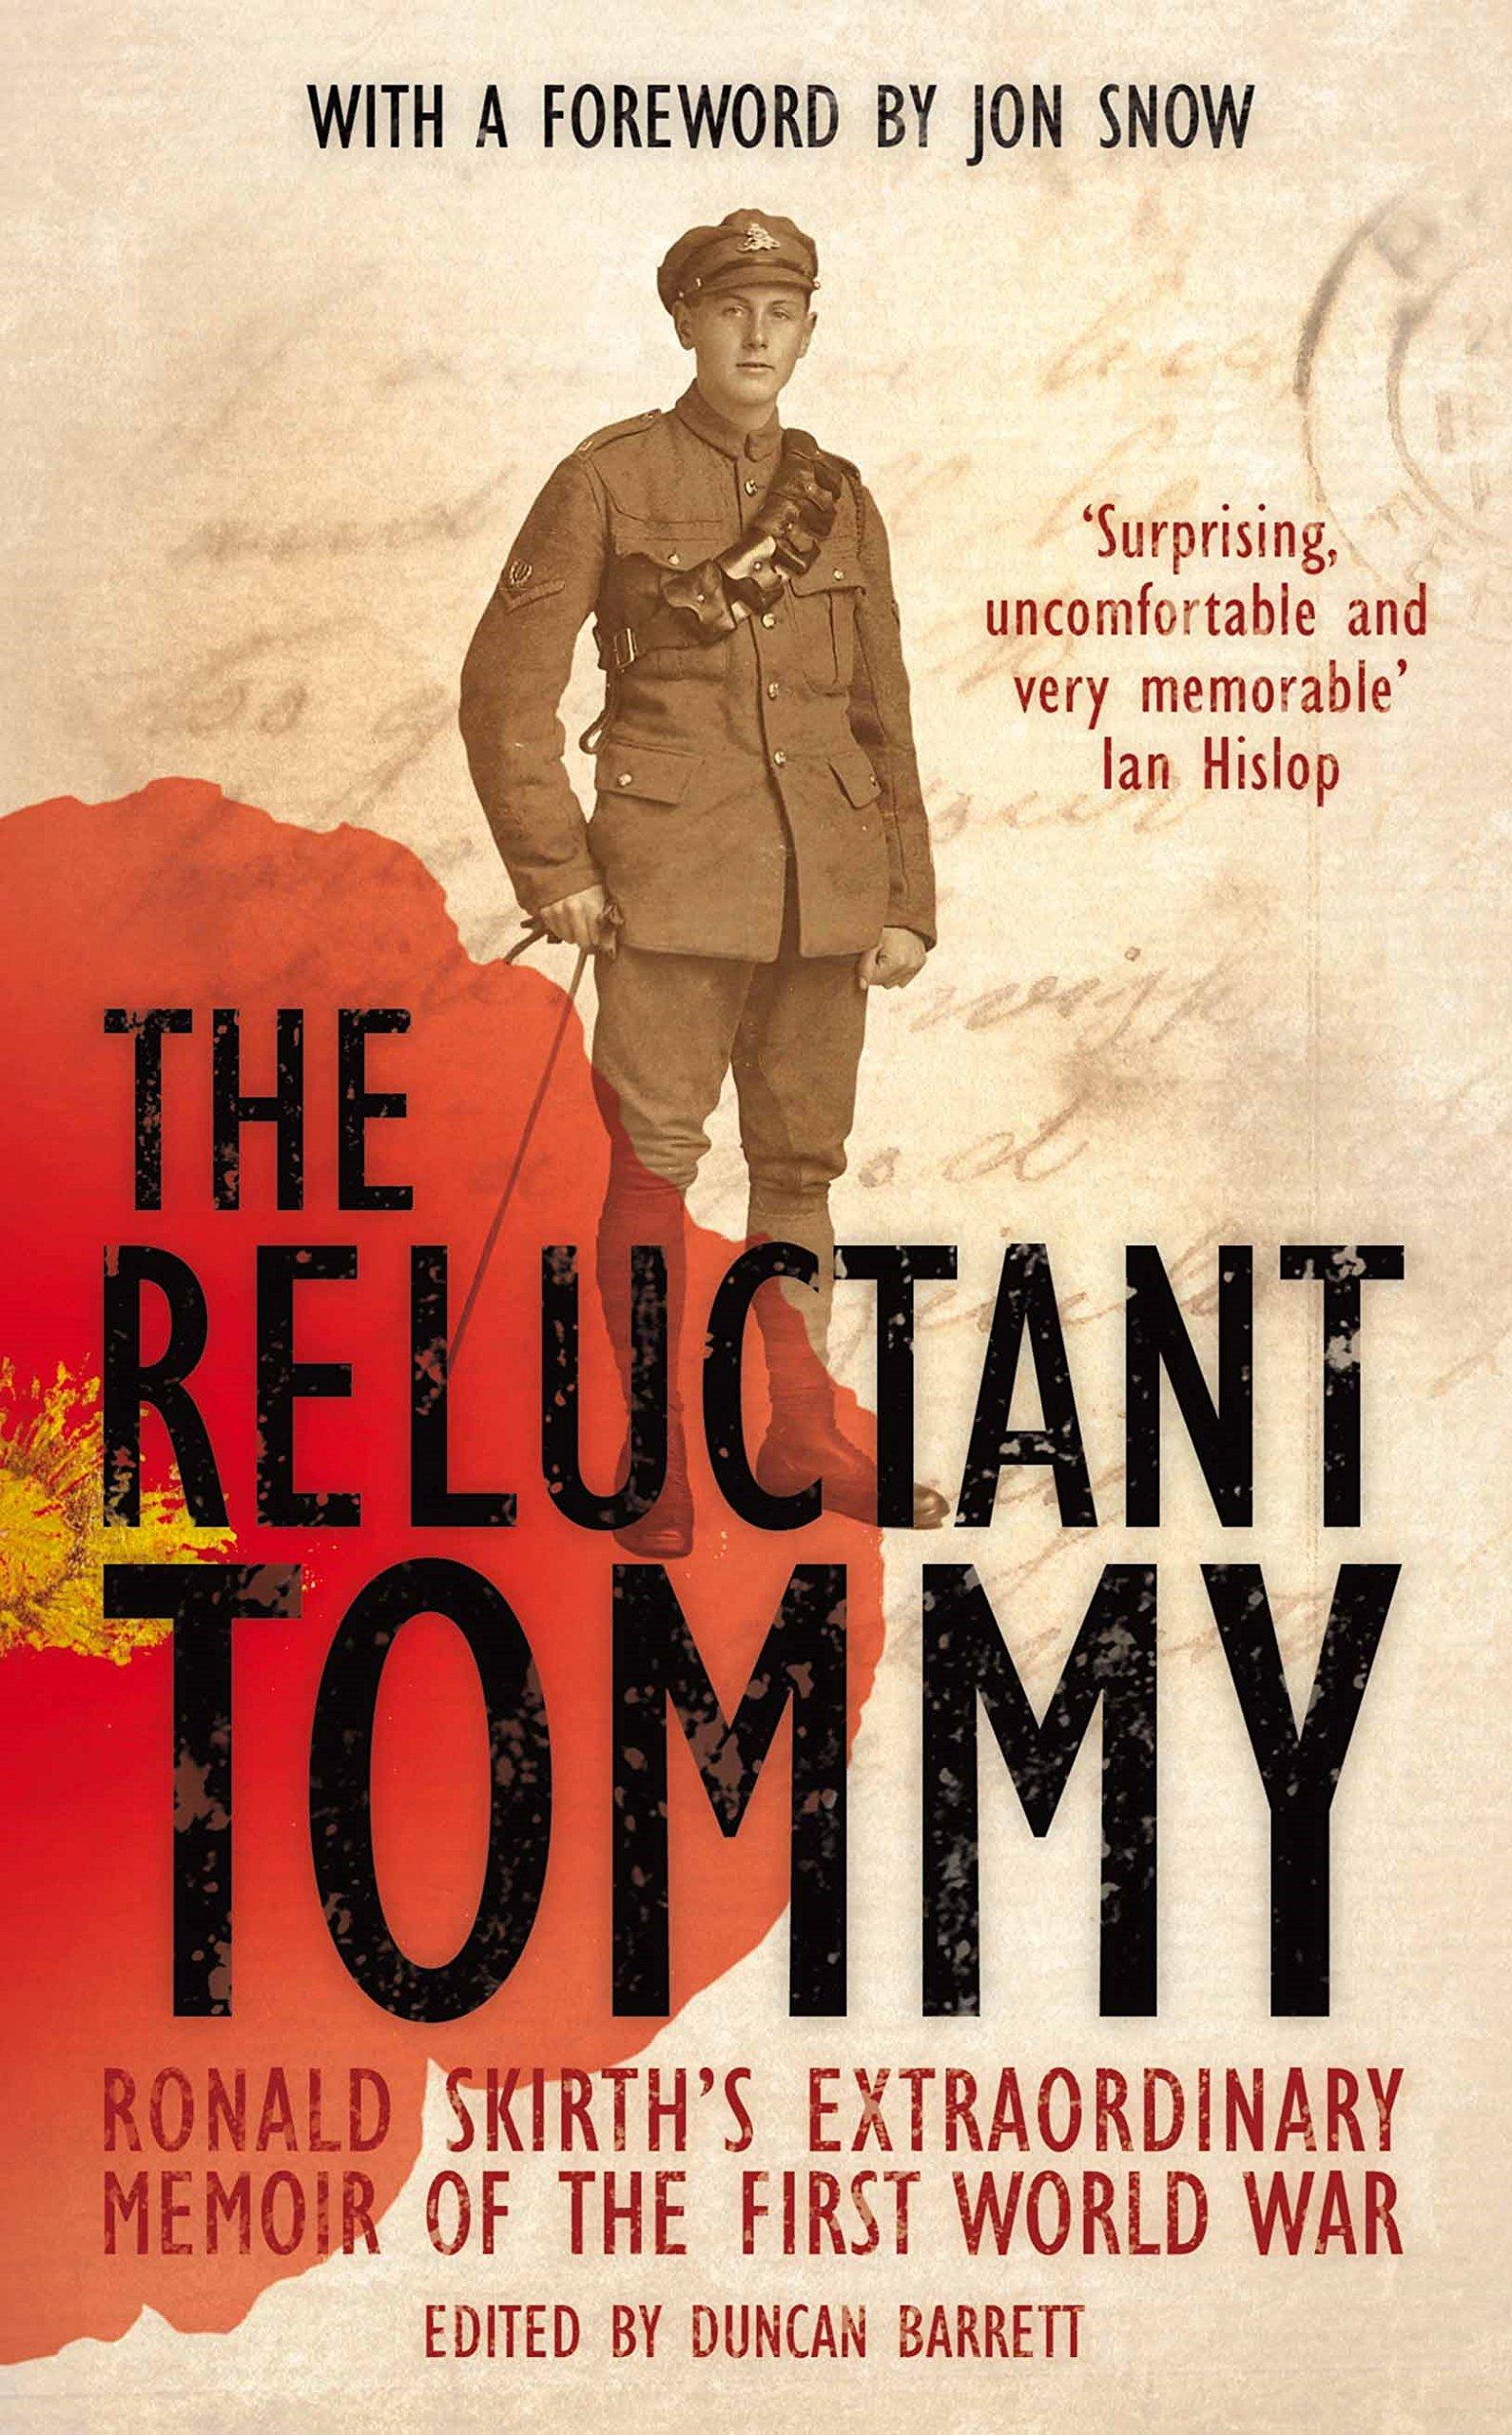 The Reluctant Tommy - Ronald Skirth's Extraordinary Memoir of the First World War